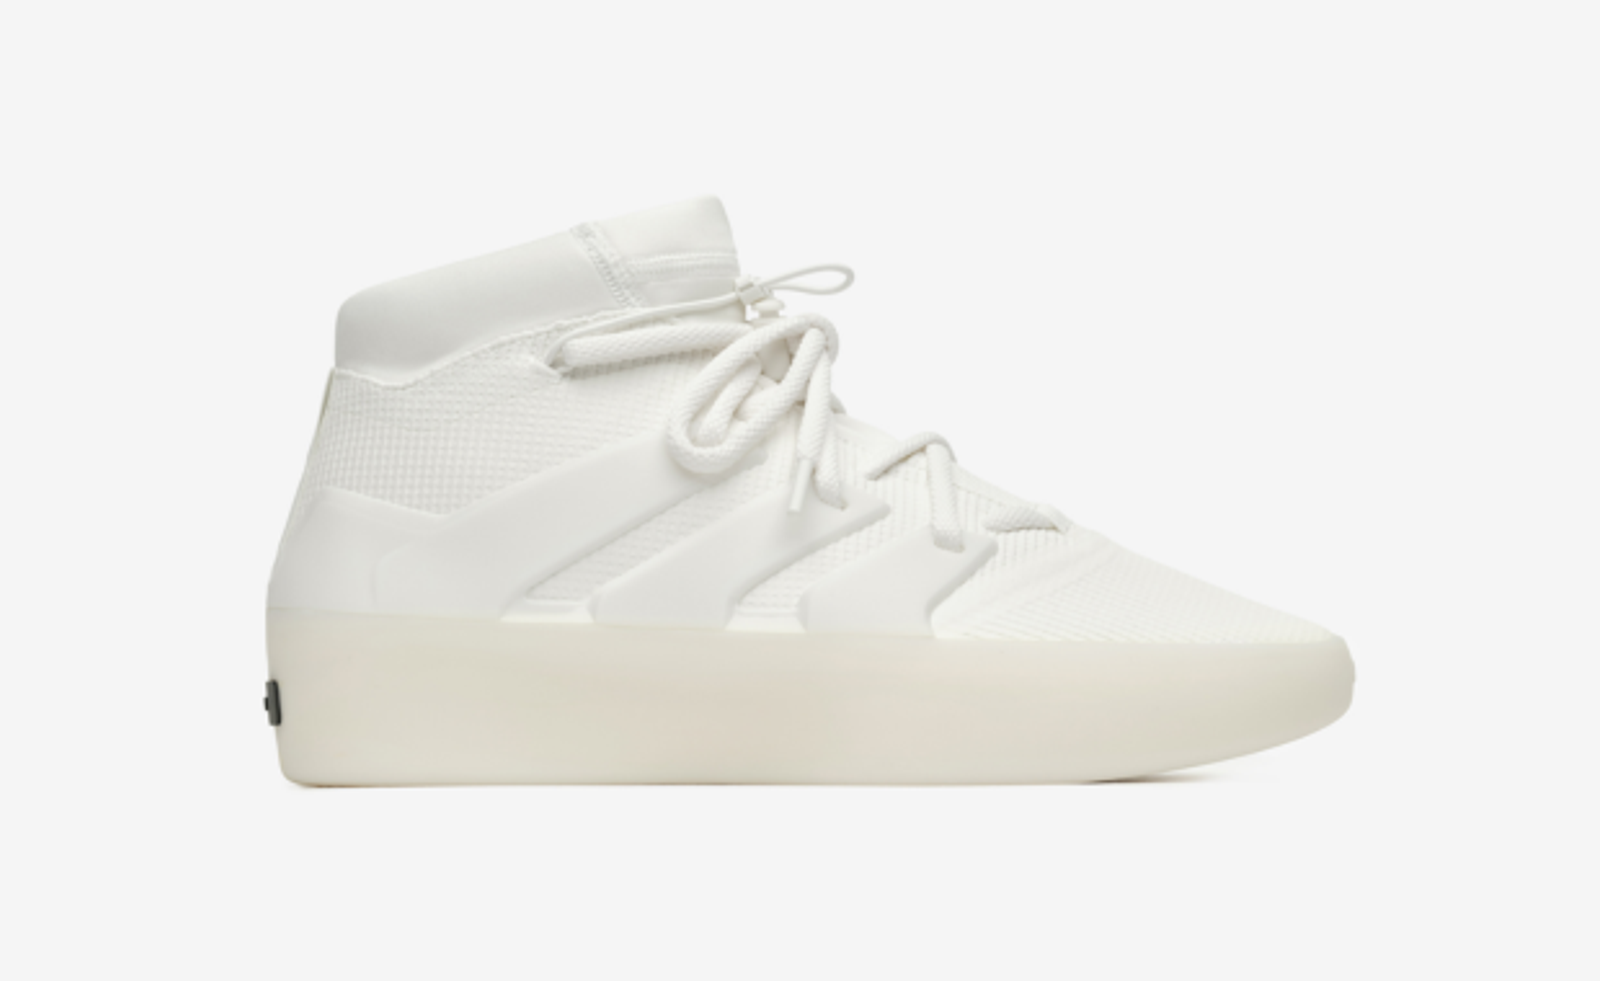 The Fear of God Athletics x adidas Basketball 1 Triple White Releases Christmas Day